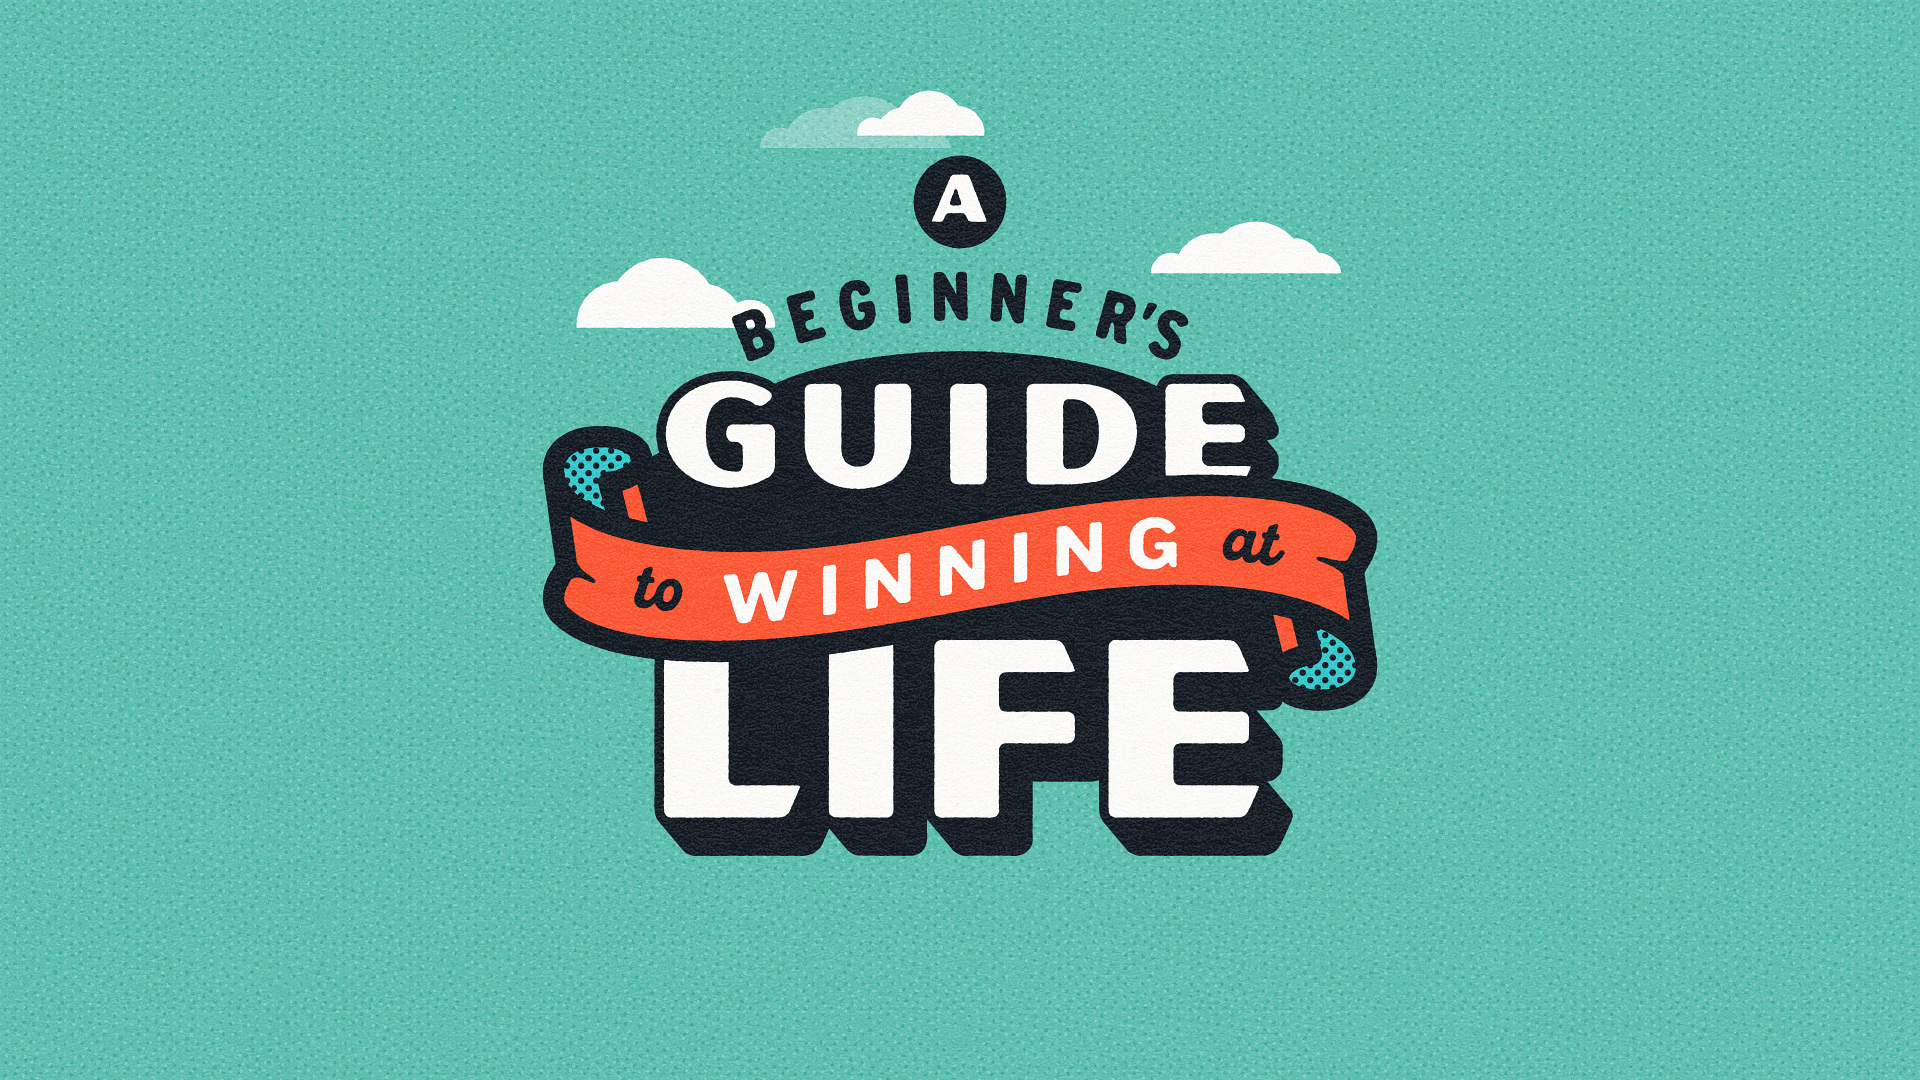 A Beginner's Guide to Winning at Life